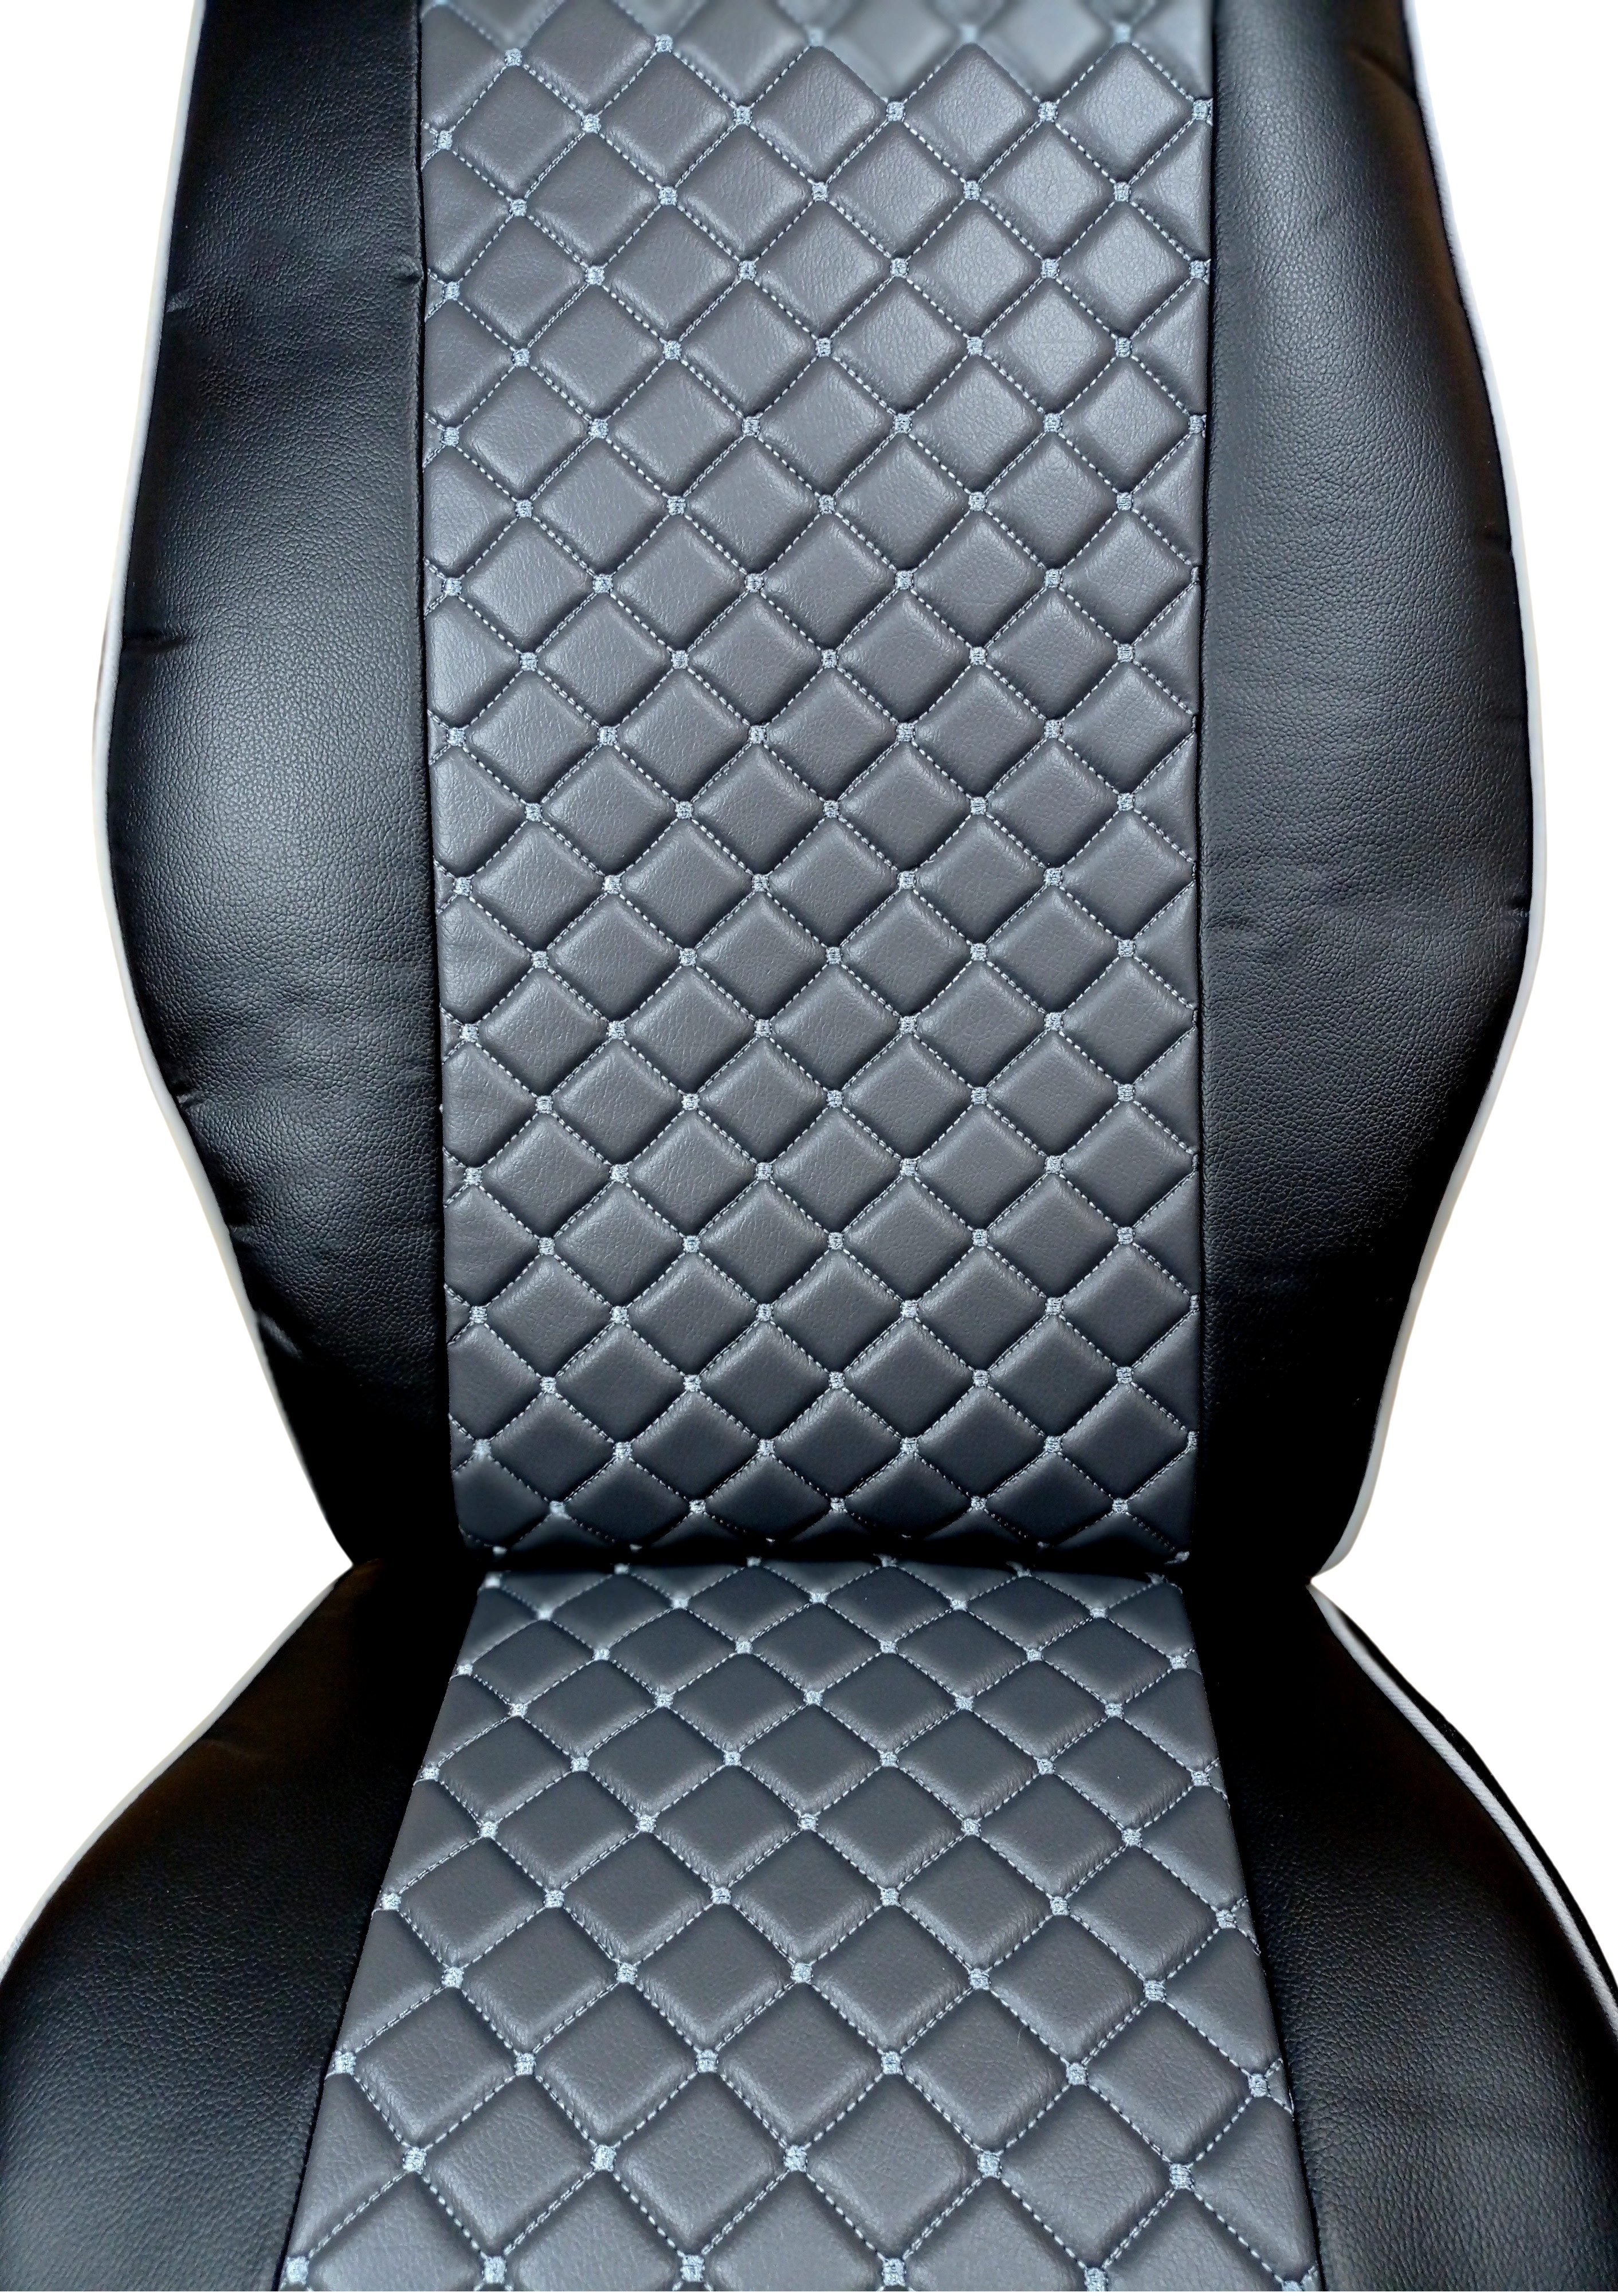 Seat covers for Volvo FH EURO 5 2006-2015 Truck Black Grey Leather LHD RHD